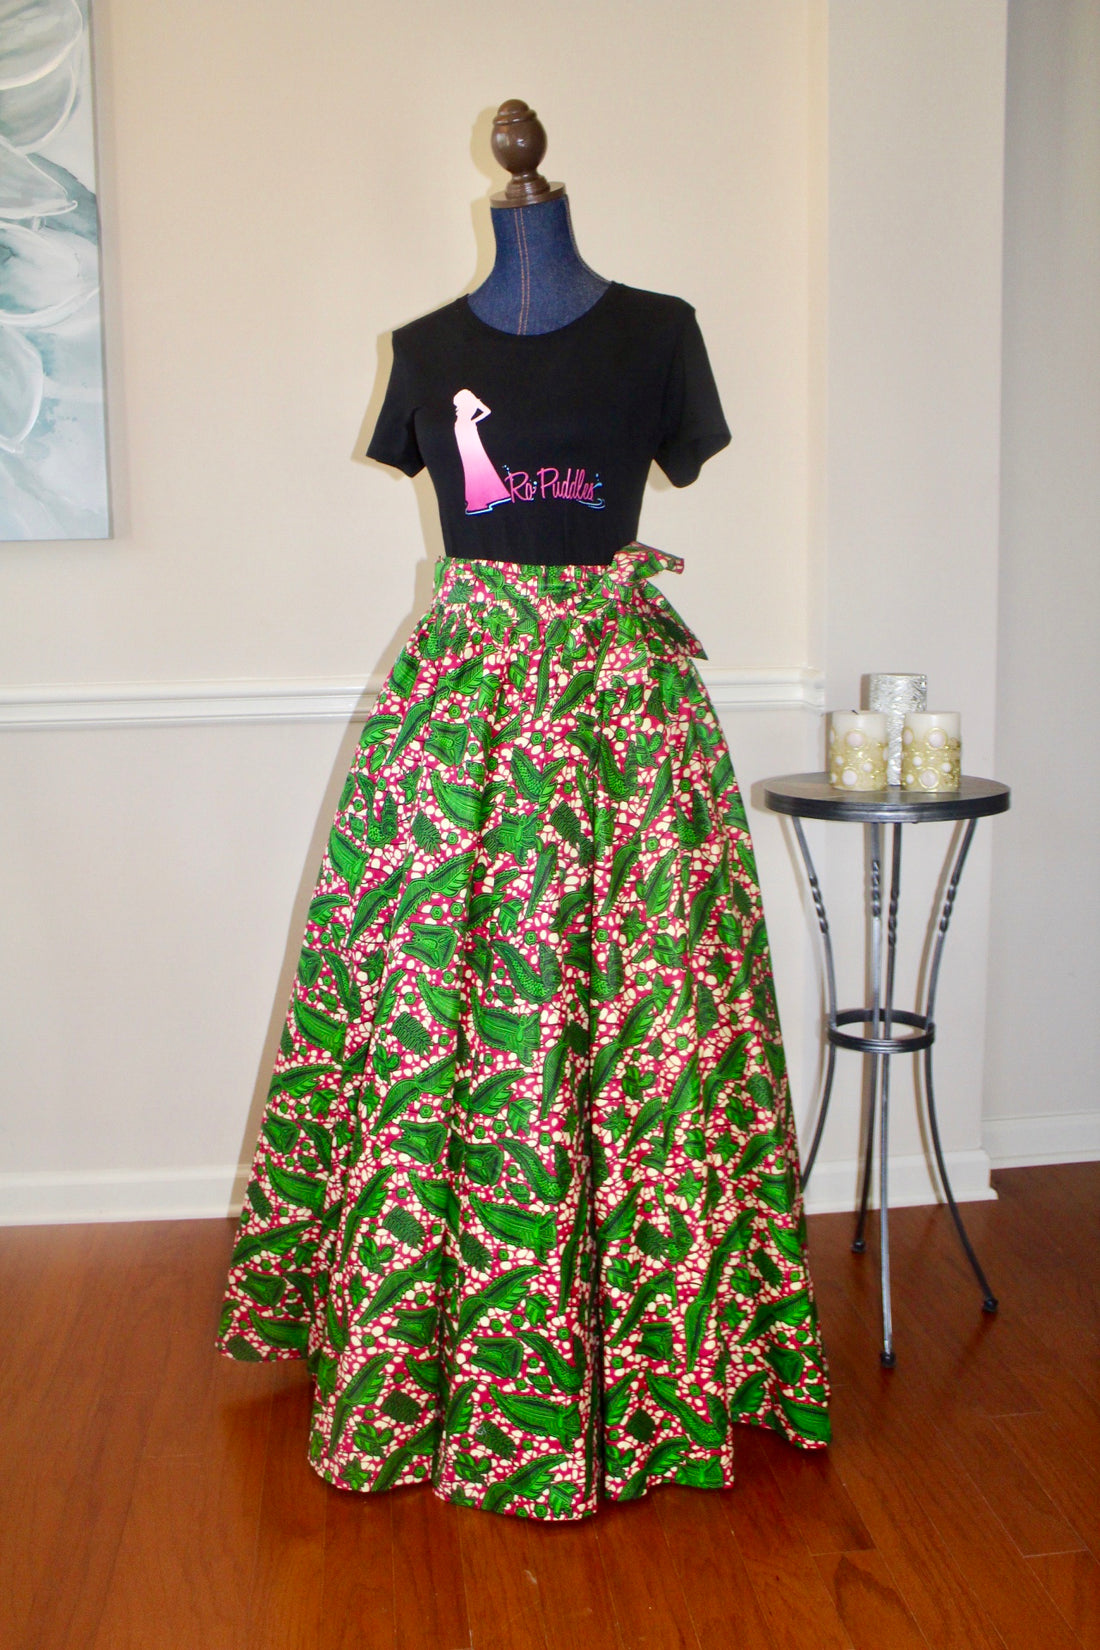 Elevate Your Look - How to Wear a Petticoat with a Skirt – Fashions By  RoPuddles